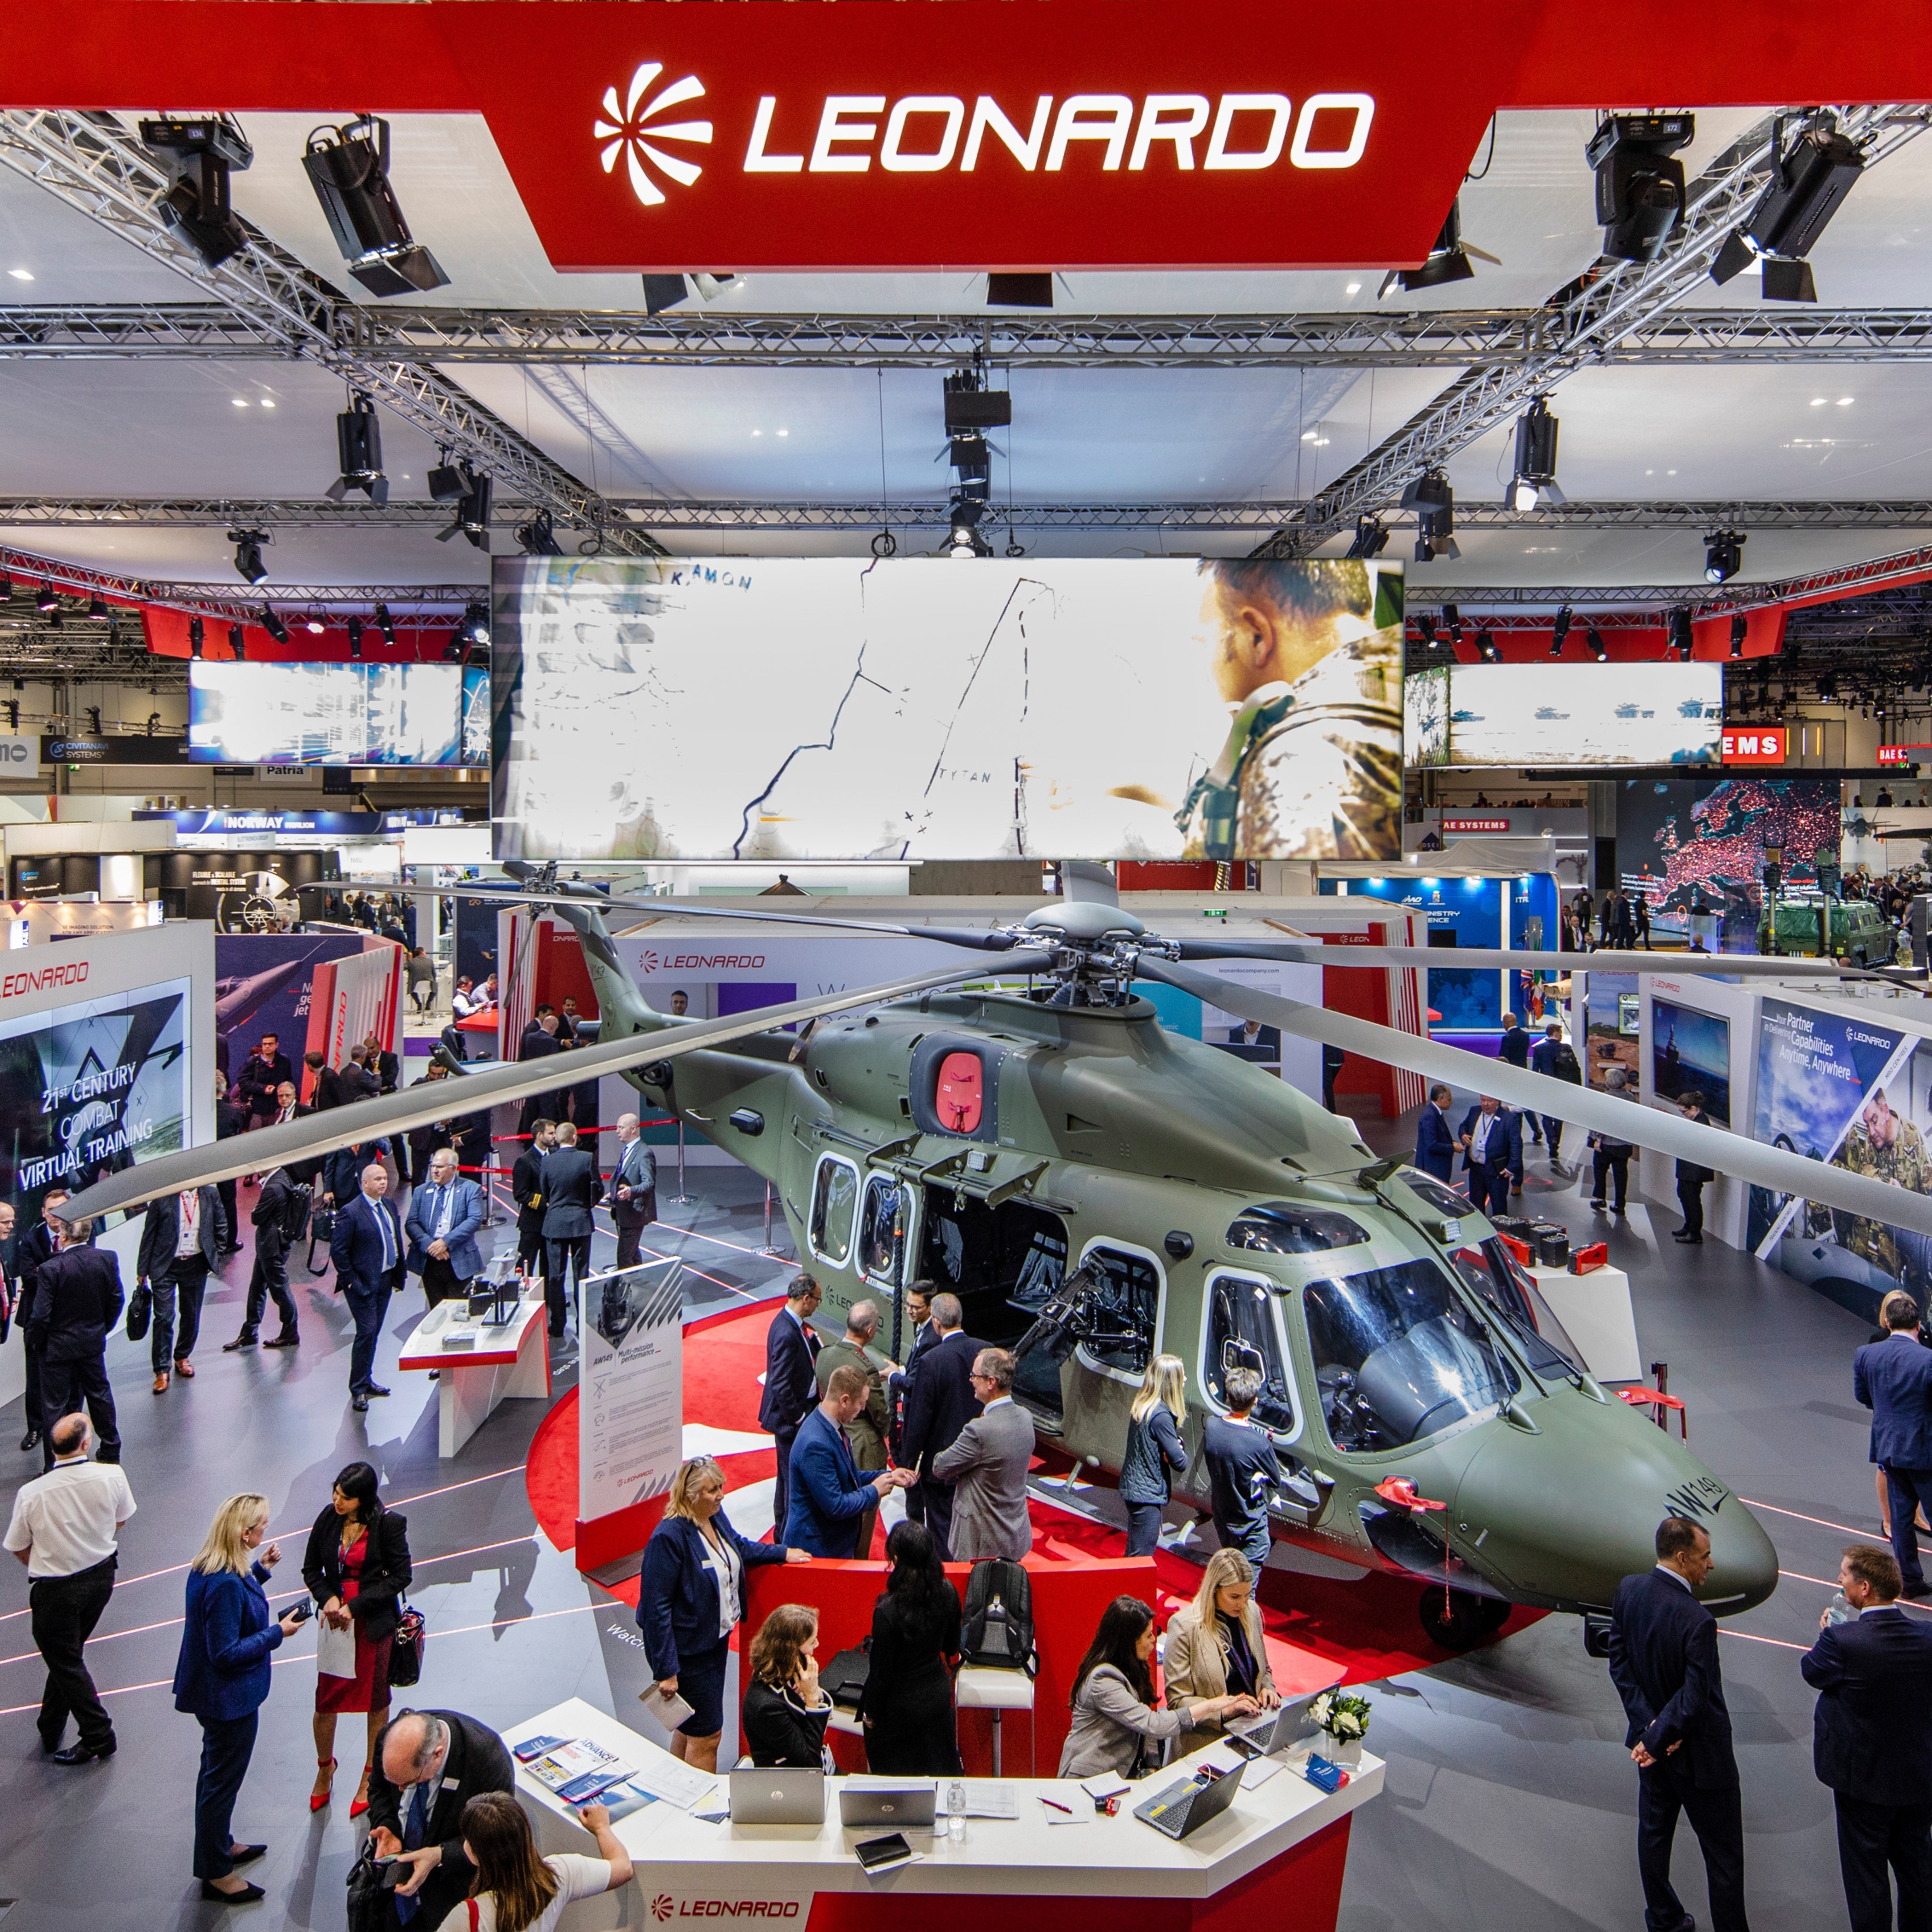 https://info.clarion-defence.com/e/339191/2021-exhibitors/3bp84c/373347014?h=oVNmnG06BHO0m6M_ox6TVtX4QcBLBm1HVl7YJHDNd3w